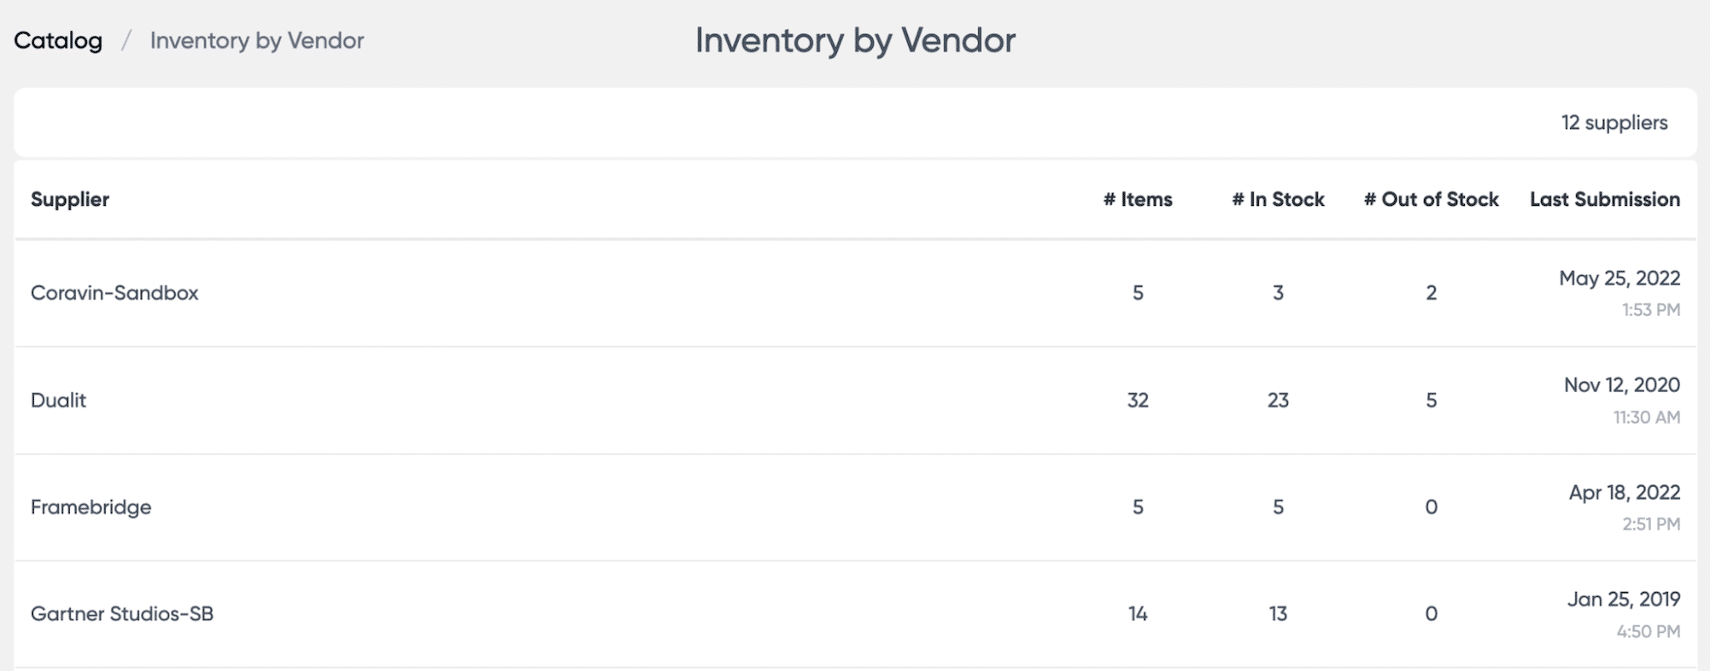 With our August product update, it's easier than ever to automate inventory updates.